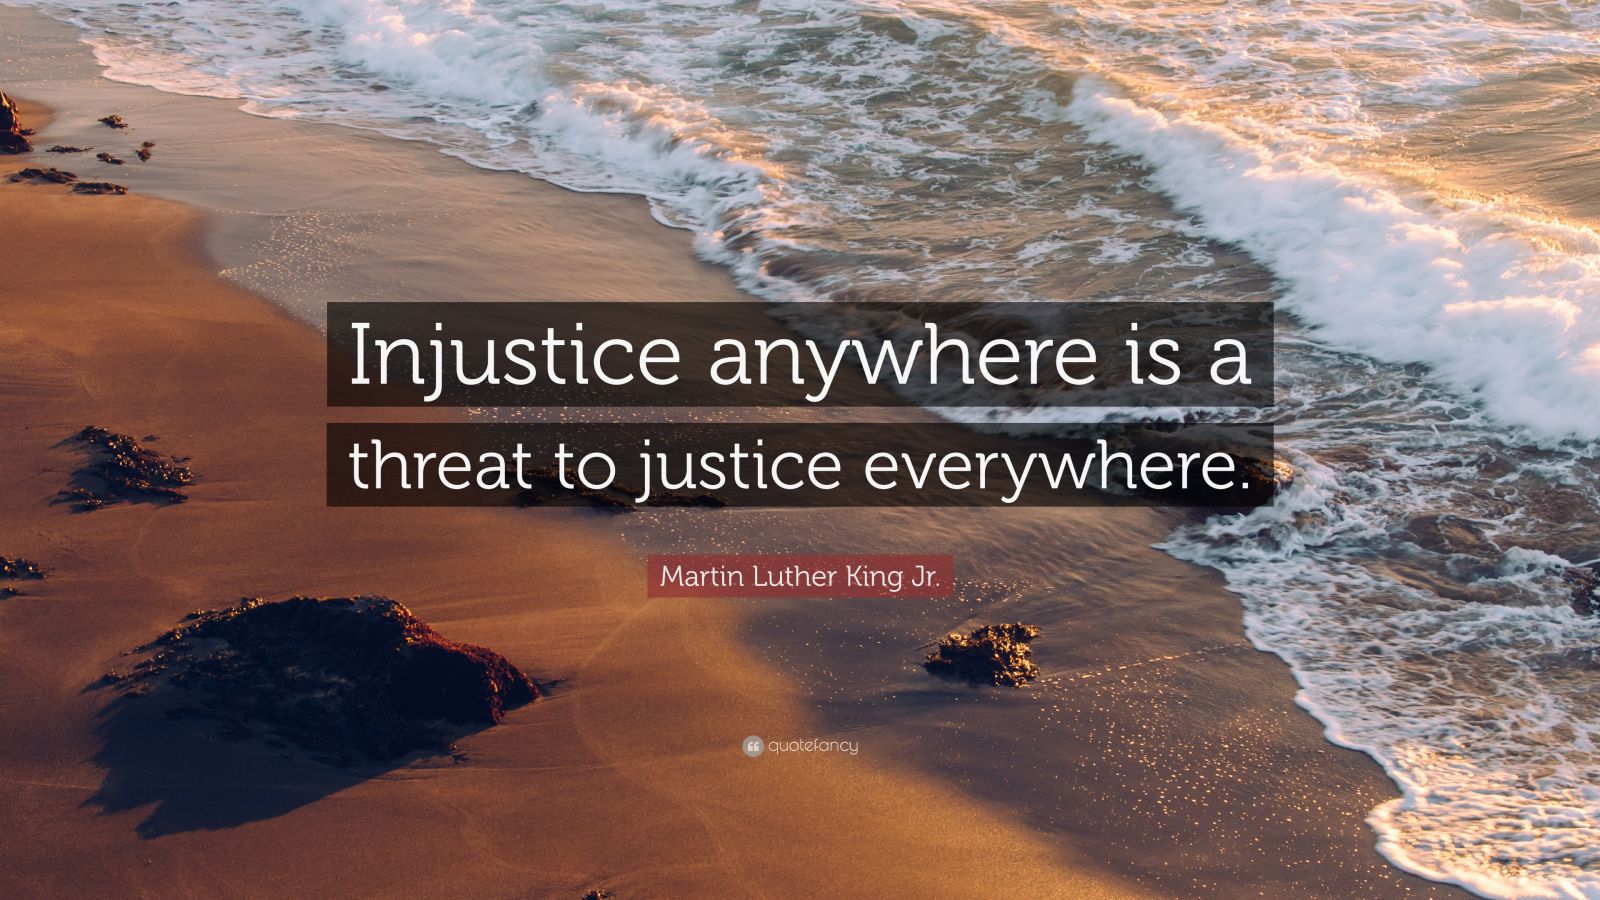 injustice anywhere is a threat to justice everywhere essay upsc